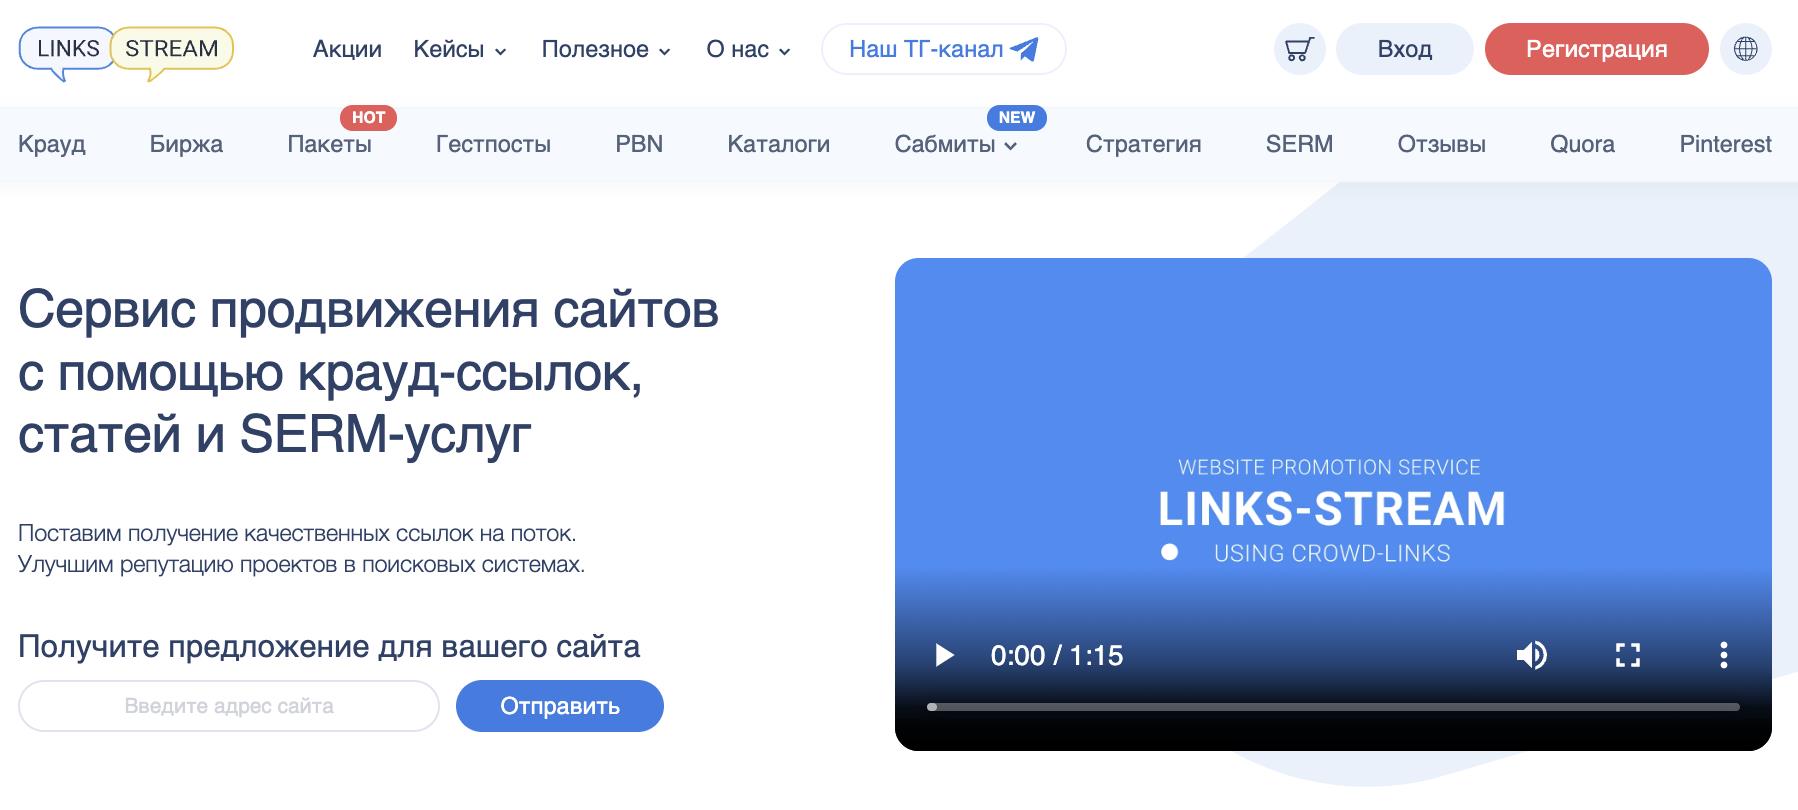 Links-Stream – selling links for a website in Ukraine and other countries of the world